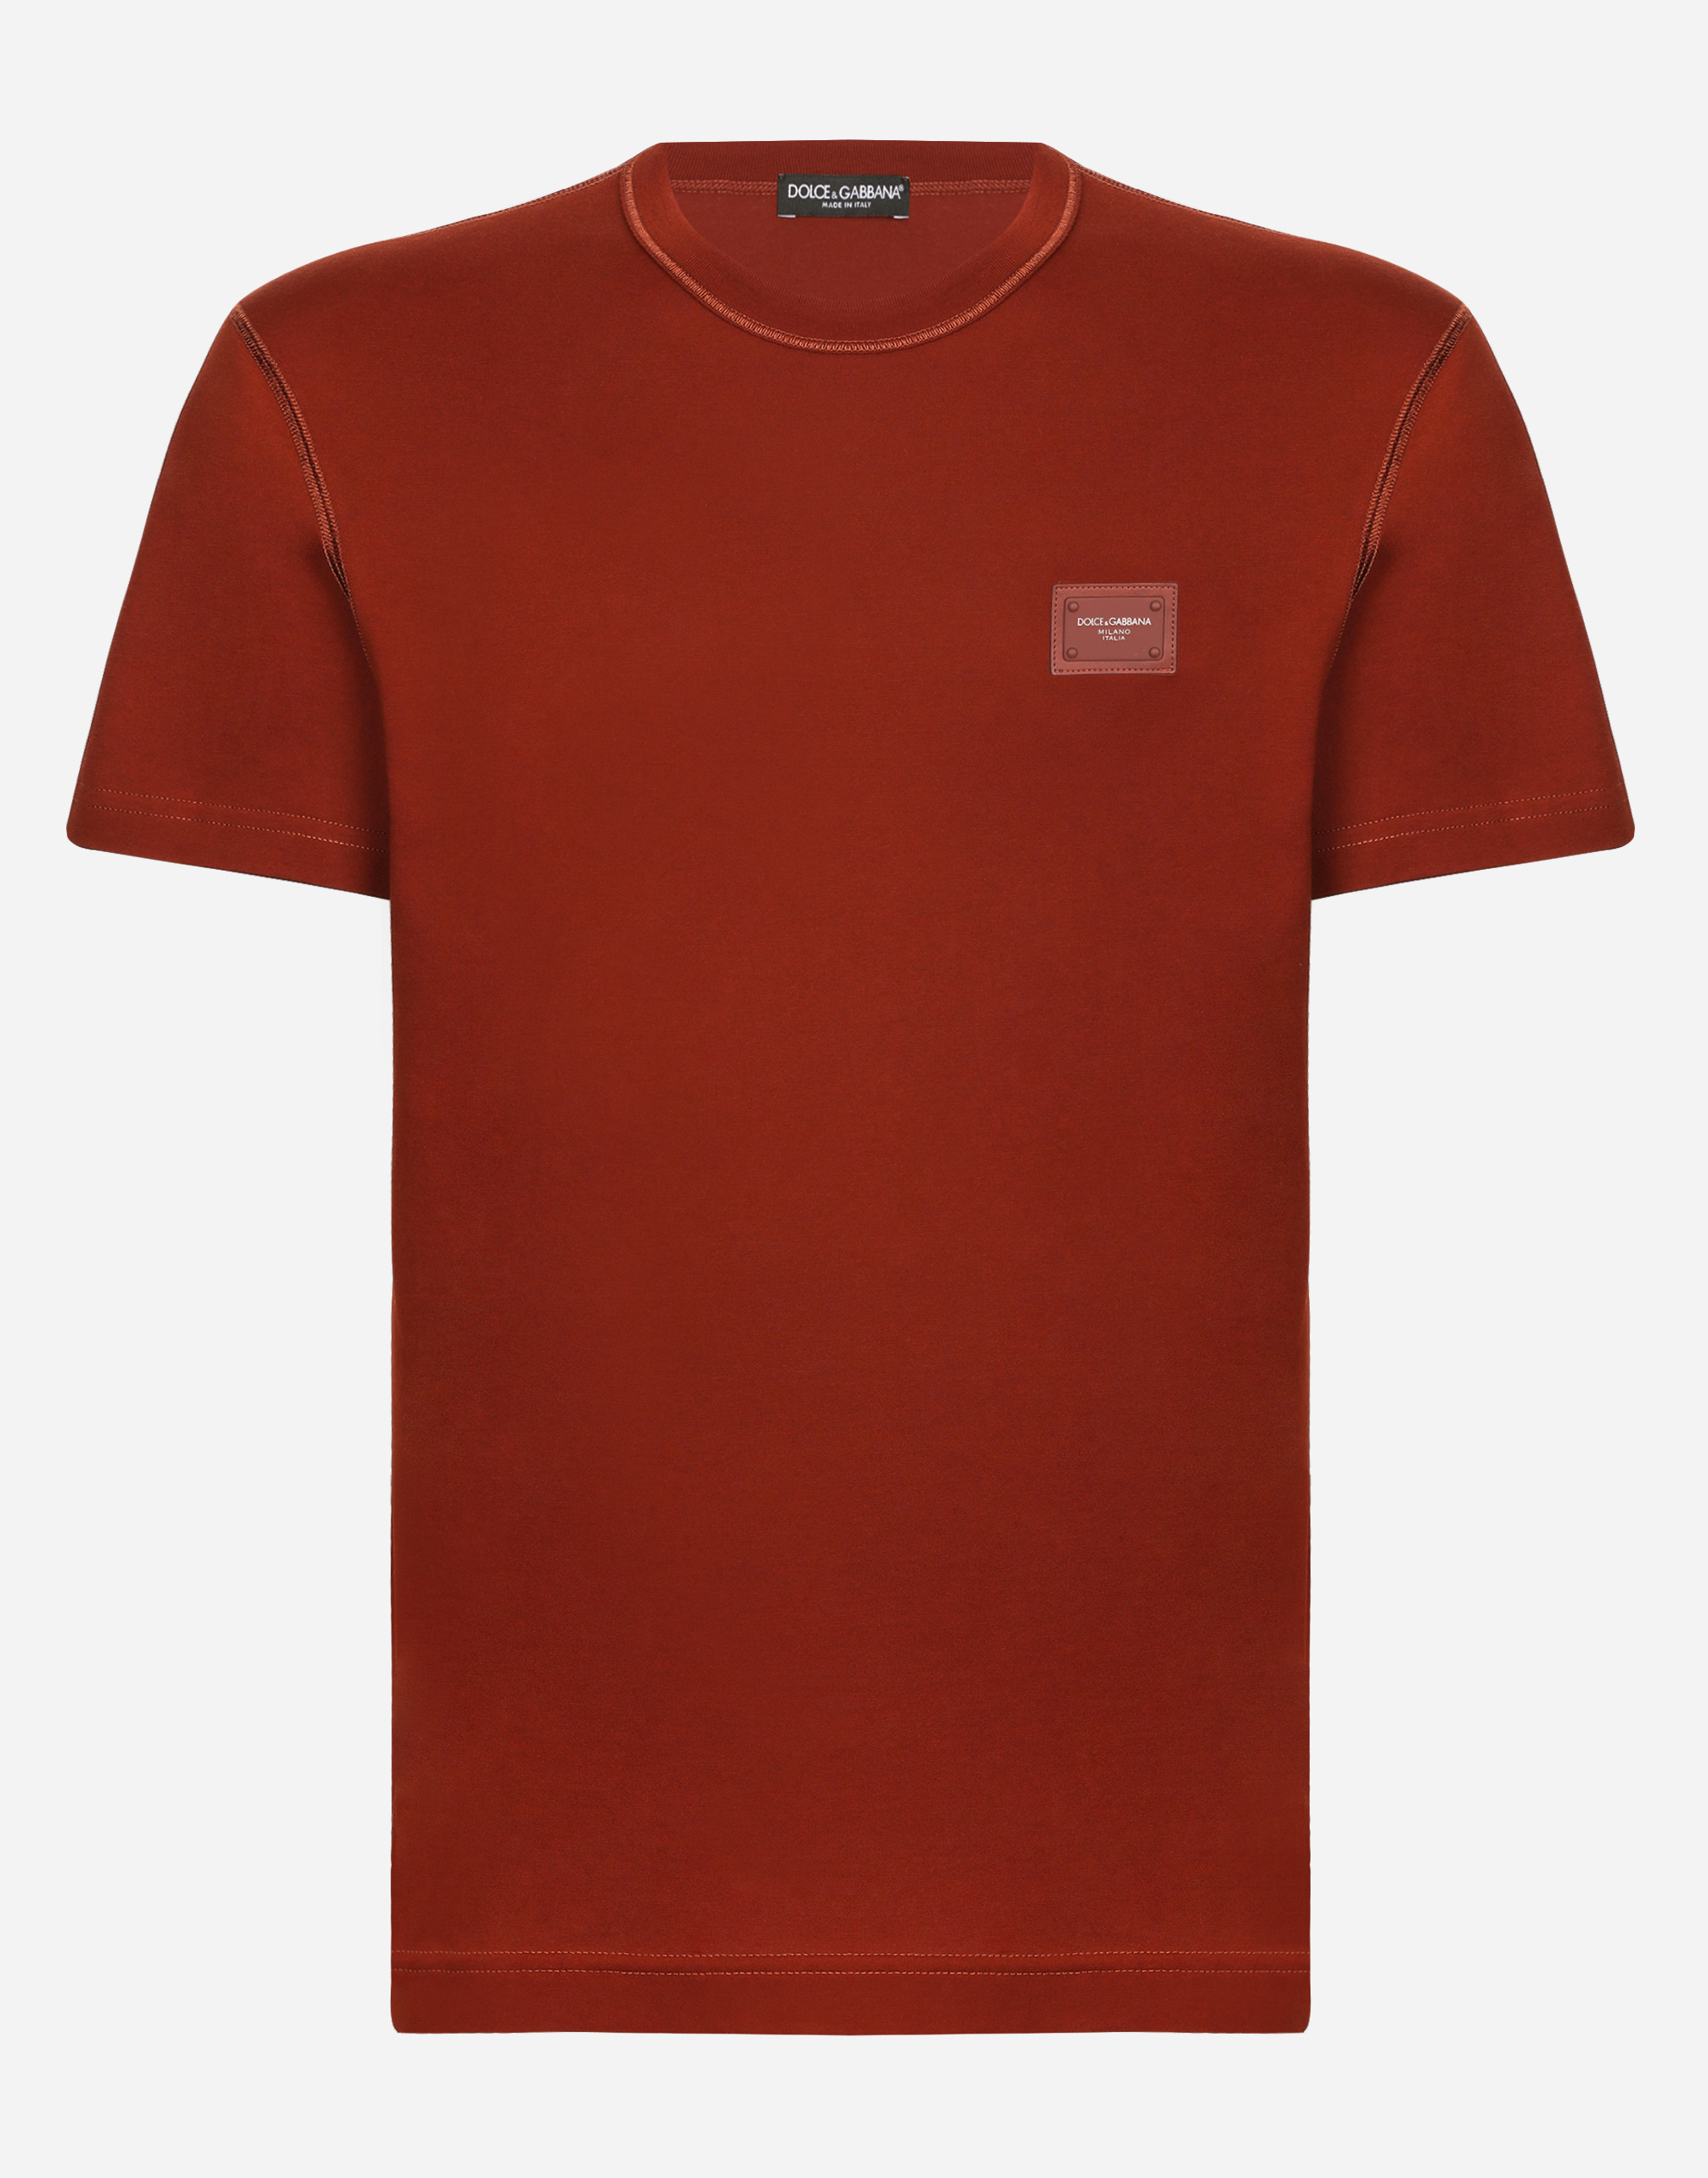 Cotton T-shirt with branded tag in Copper